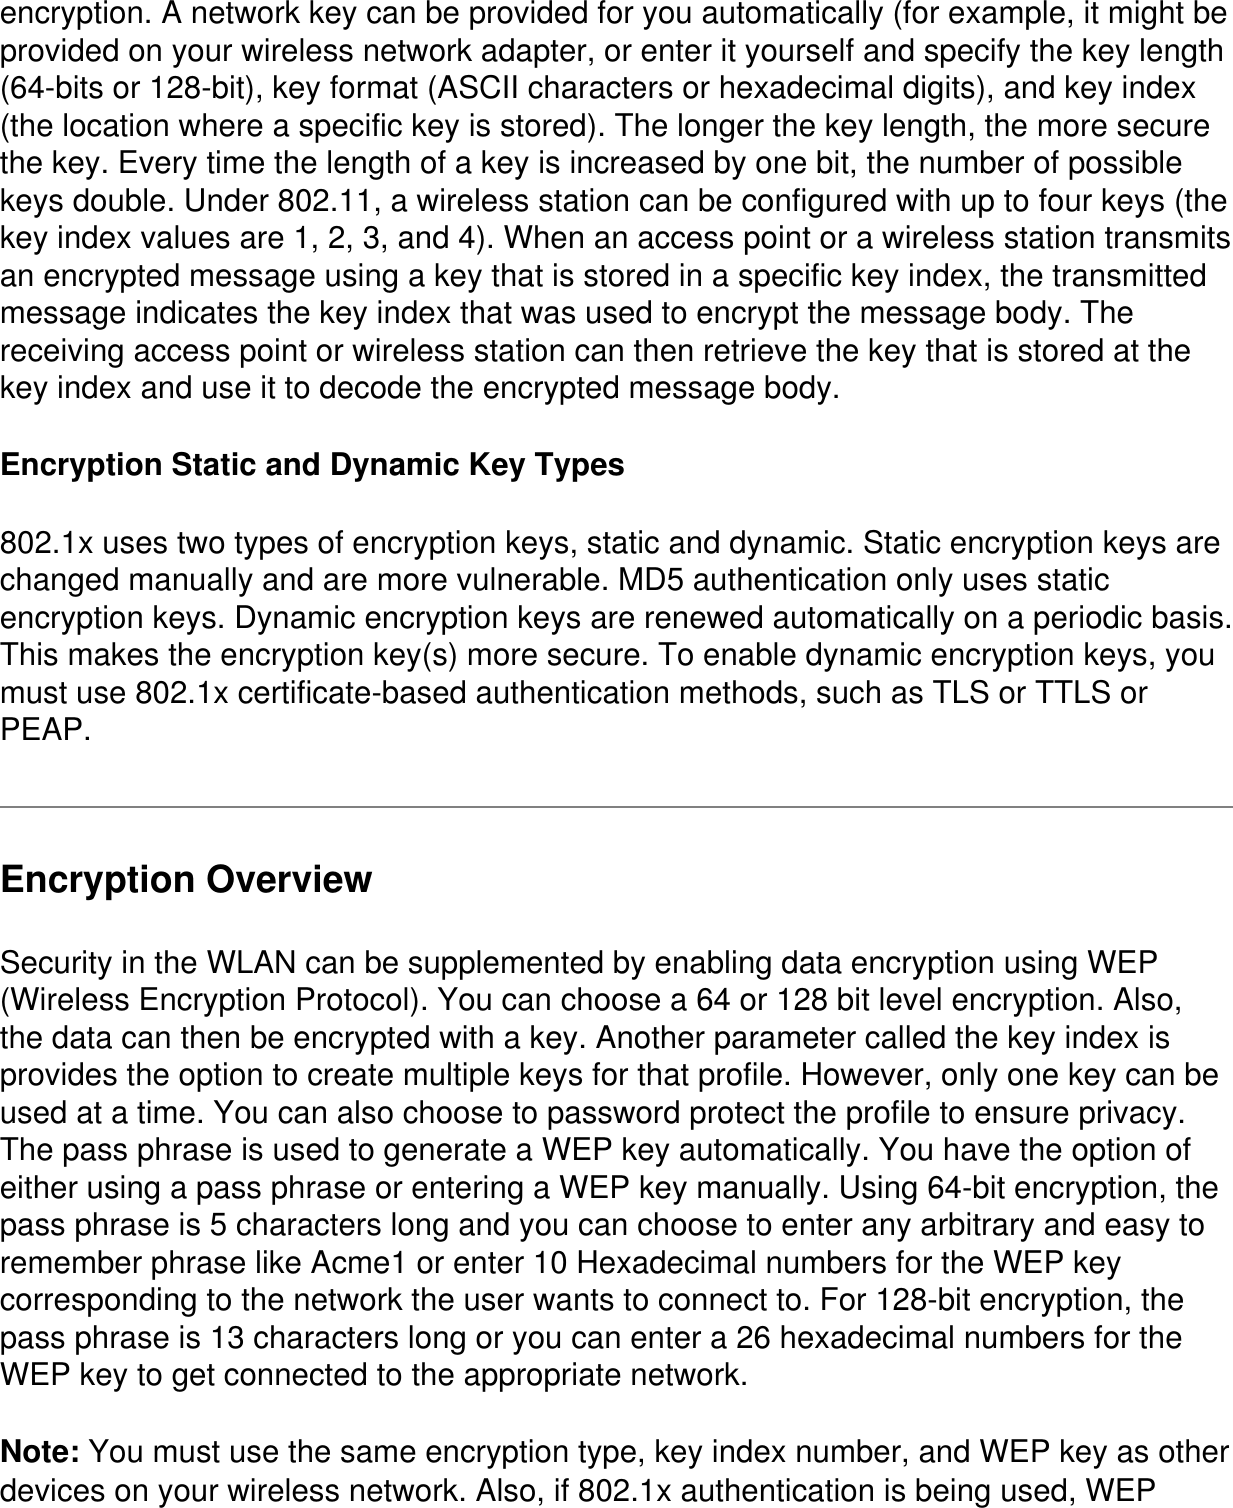 encryption. A network key can be provided for you automatically (for example, it might be provided on your wireless network adapter, or enter it yourself and specify the key length (64-bits or 128-bit), key format (ASCII characters or hexadecimal digits), and key index (the location where a specific key is stored). The longer the key length, the more secure the key. Every time the length of a key is increased by one bit, the number of possible keys double. Under 802.11, a wireless station can be configured with up to four keys (the key index values are 1, 2, 3, and 4). When an access point or a wireless station transmits an encrypted message using a key that is stored in a specific key index, the transmitted message indicates the key index that was used to encrypt the message body. The receiving access point or wireless station can then retrieve the key that is stored at the key index and use it to decode the encrypted message body.Encryption Static and Dynamic Key Types802.1x uses two types of encryption keys, static and dynamic. Static encryption keys are changed manually and are more vulnerable. MD5 authentication only uses static encryption keys. Dynamic encryption keys are renewed automatically on a periodic basis. This makes the encryption key(s) more secure. To enable dynamic encryption keys, you must use 802.1x certificate-based authentication methods, such as TLS or TTLS or PEAP.Encryption OverviewSecurity in the WLAN can be supplemented by enabling data encryption using WEP (Wireless Encryption Protocol). You can choose a 64 or 128 bit level encryption. Also, the data can then be encrypted with a key. Another parameter called the key index is provides the option to create multiple keys for that profile. However, only one key can be used at a time. You can also choose to password protect the profile to ensure privacy. The pass phrase is used to generate a WEP key automatically. You have the option of either using a pass phrase or entering a WEP key manually. Using 64-bit encryption, the pass phrase is 5 characters long and you can choose to enter any arbitrary and easy to remember phrase like Acme1 or enter 10 Hexadecimal numbers for the WEP key corresponding to the network the user wants to connect to. For 128-bit encryption, the pass phrase is 13 characters long or you can enter a 26 hexadecimal numbers for the WEP key to get connected to the appropriate network.Note: You must use the same encryption type, key index number, and WEP key as other devices on your wireless network. Also, if 802.1x authentication is being used, WEP 